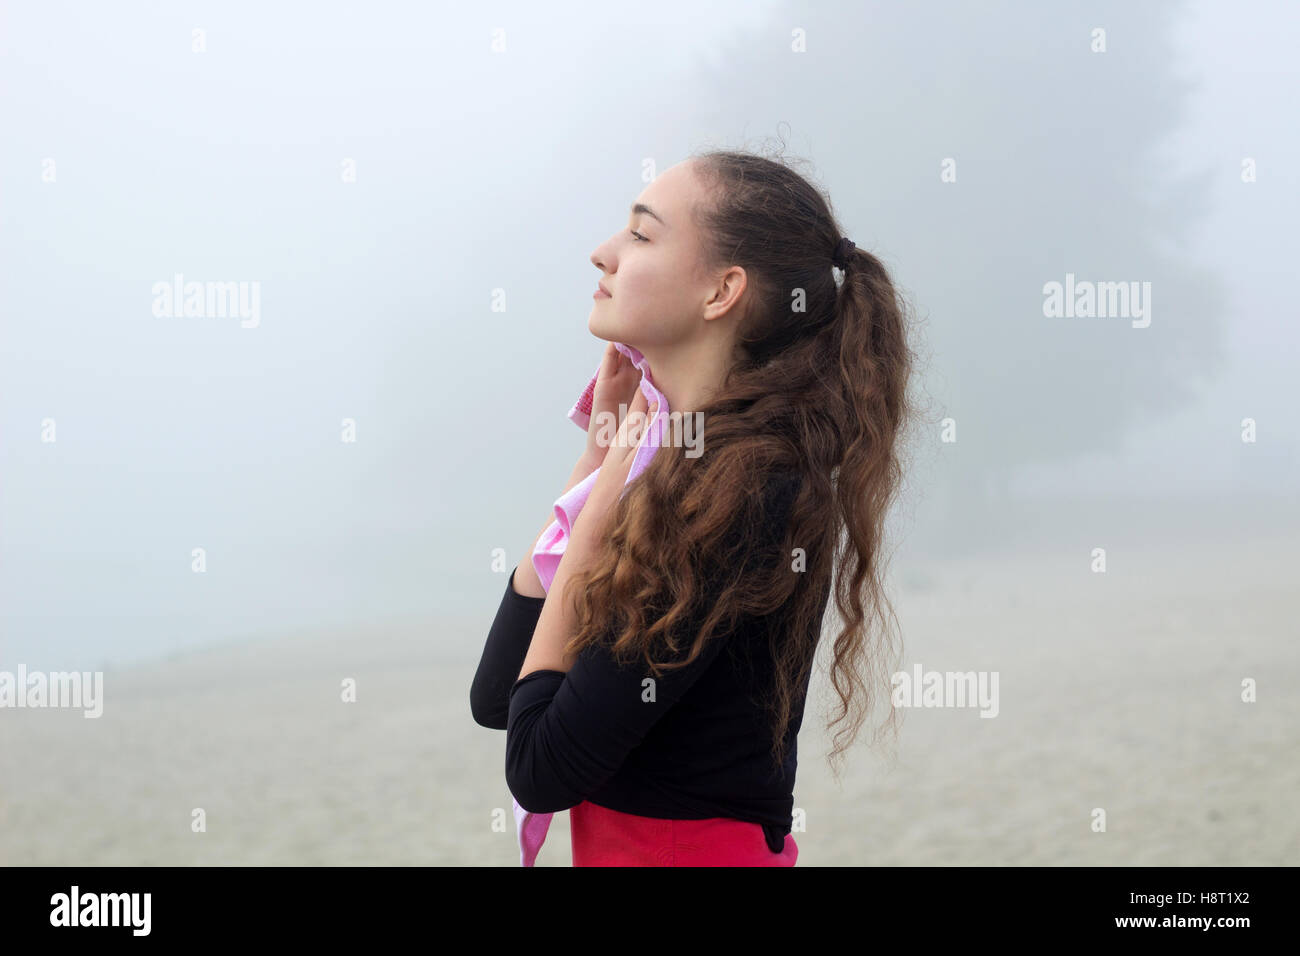 Young pretty slim fitness sporty woman with towel during break at training workout outdoor Stock Photo